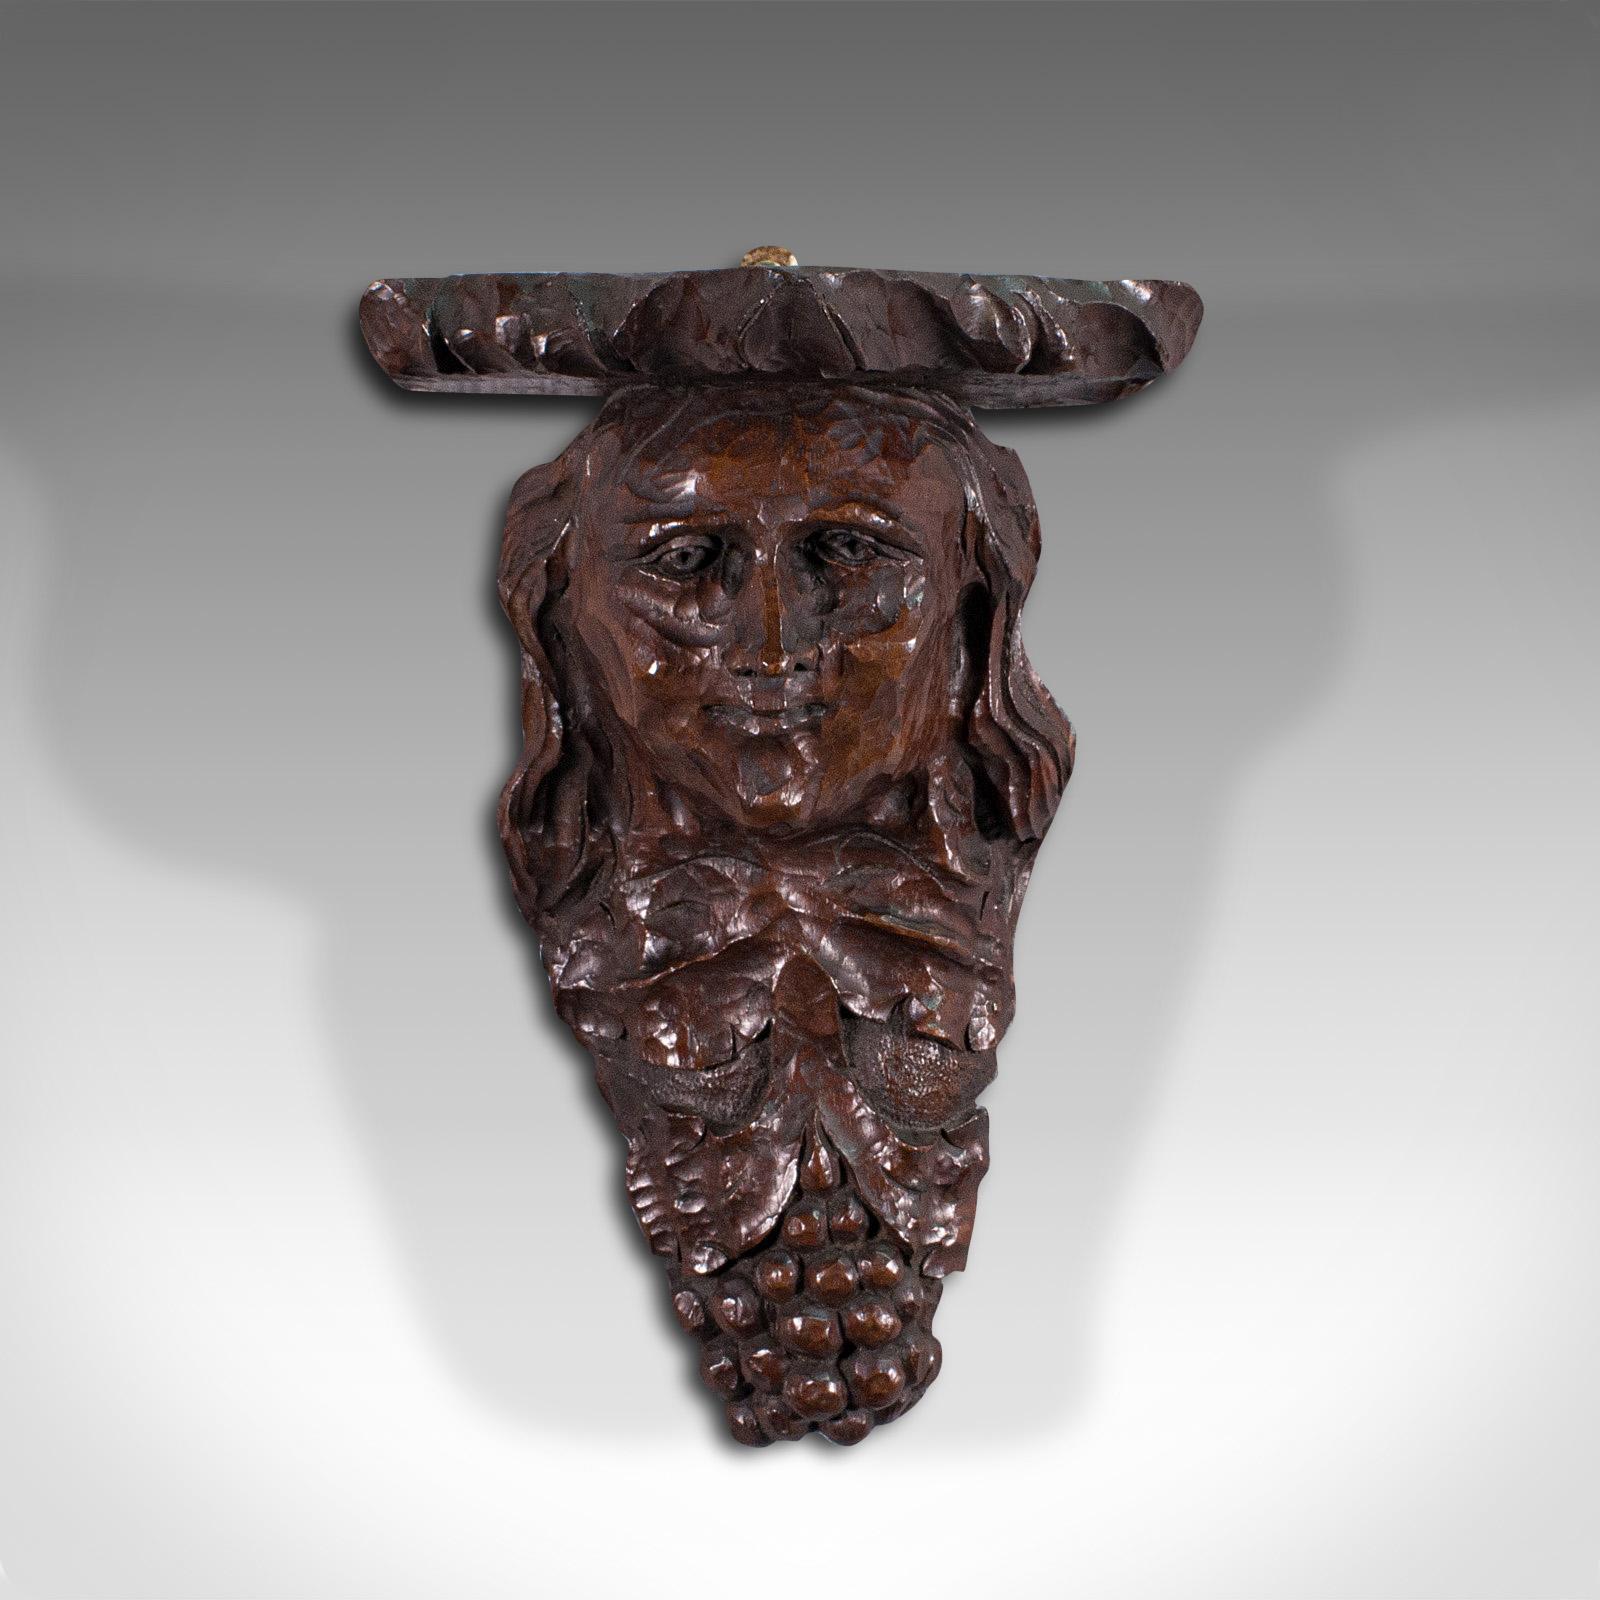 This is an antique decorative sconce. An American, carved oak figural candle bracket, dating to the late 18th century, circa 1800.

Wonderfully naive carving to this fascinating American sconce
Displays a desirable aged patina
Carved oak offers